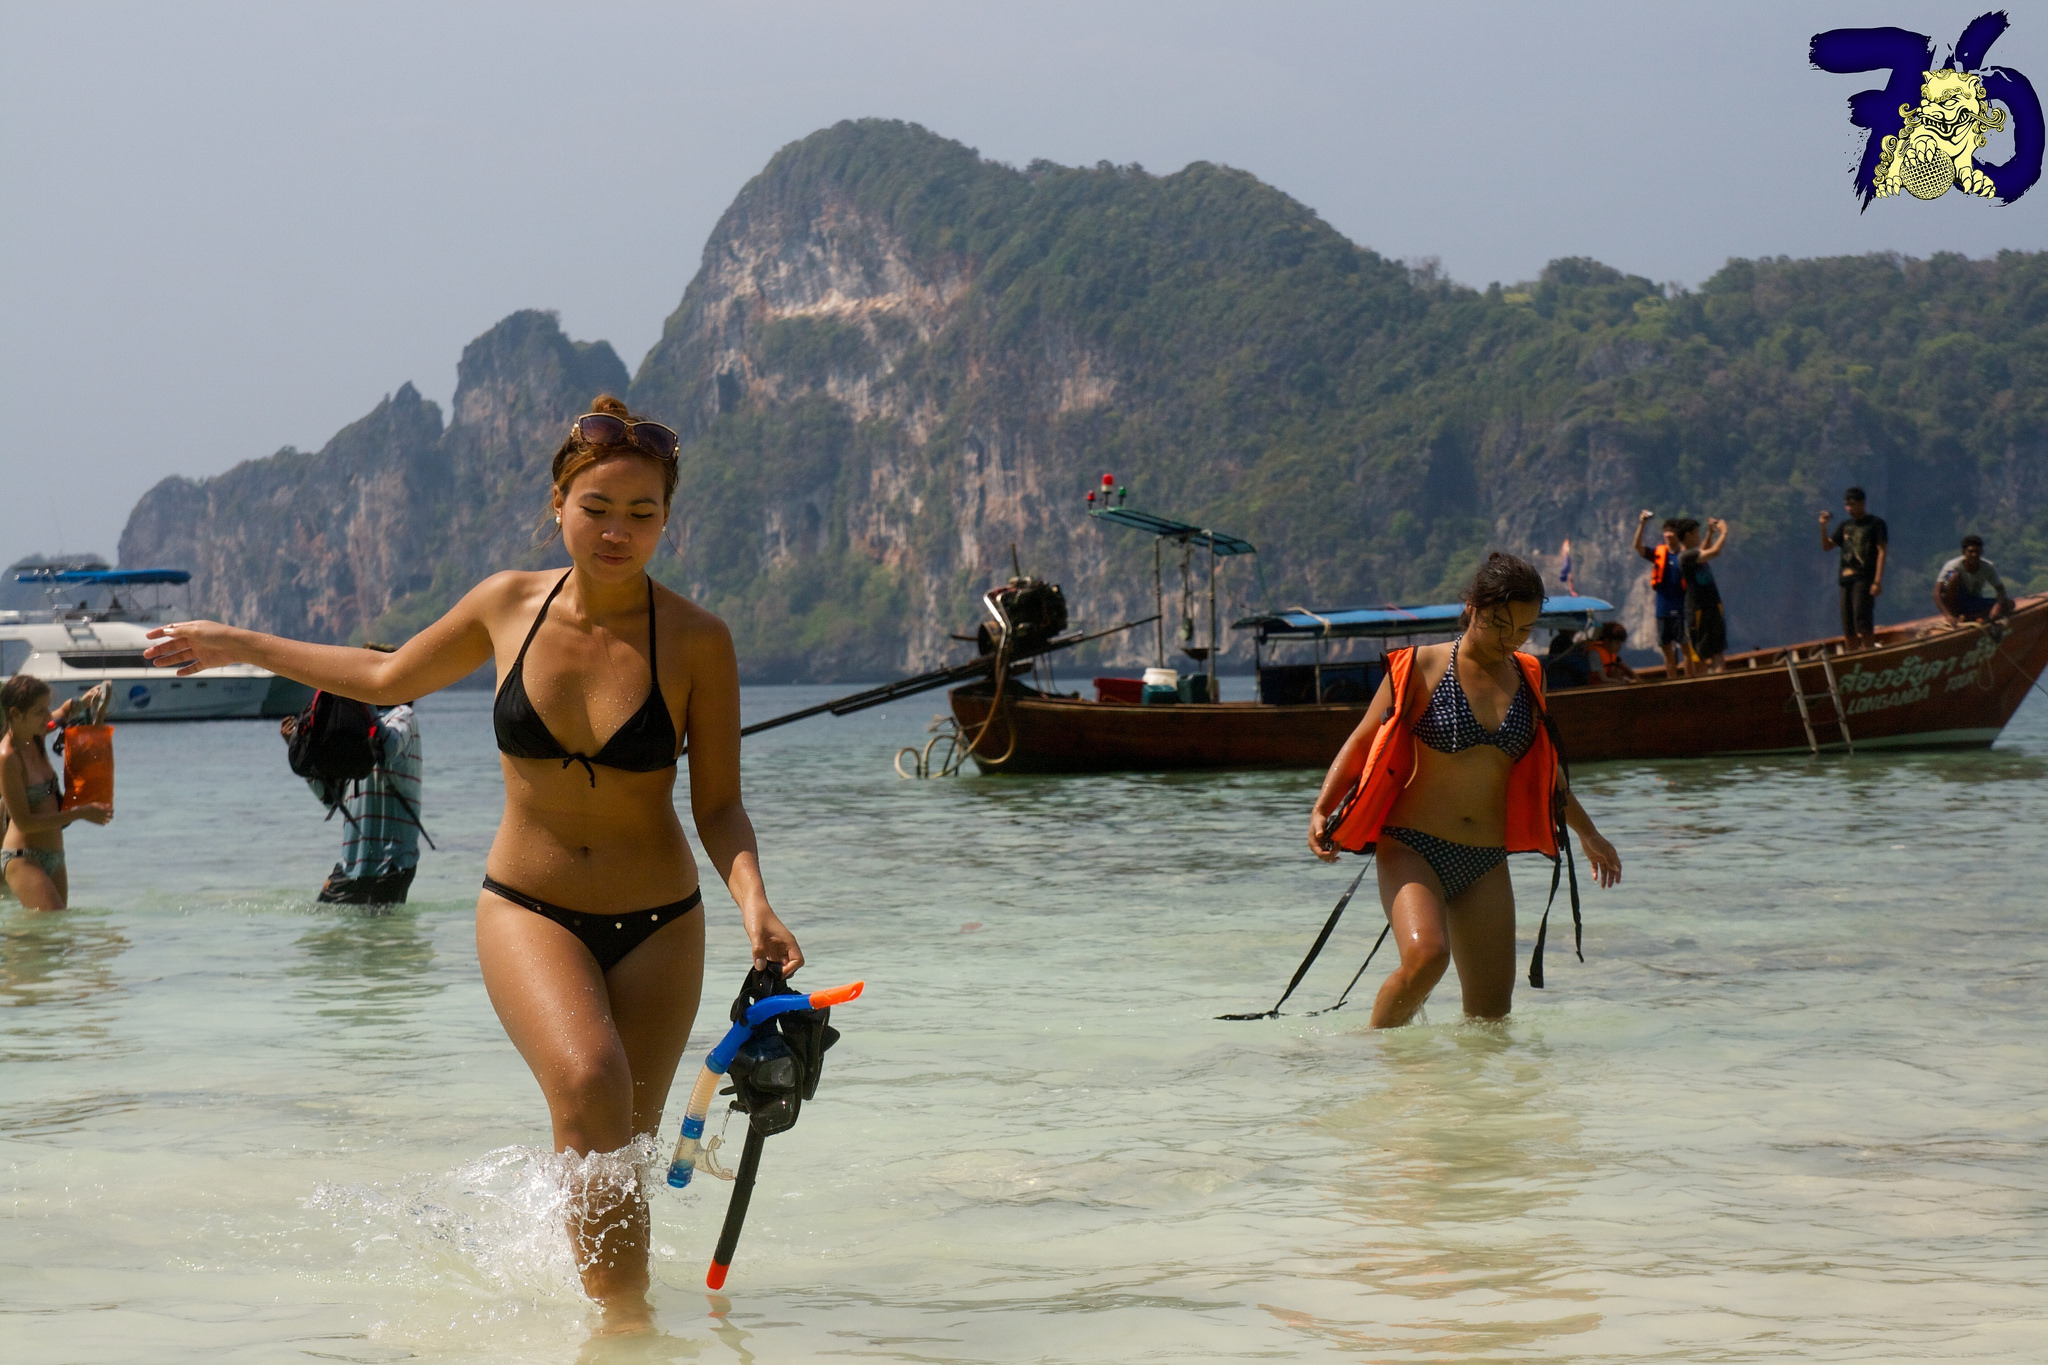 Thailand is home to many of the world's sexiest beaches